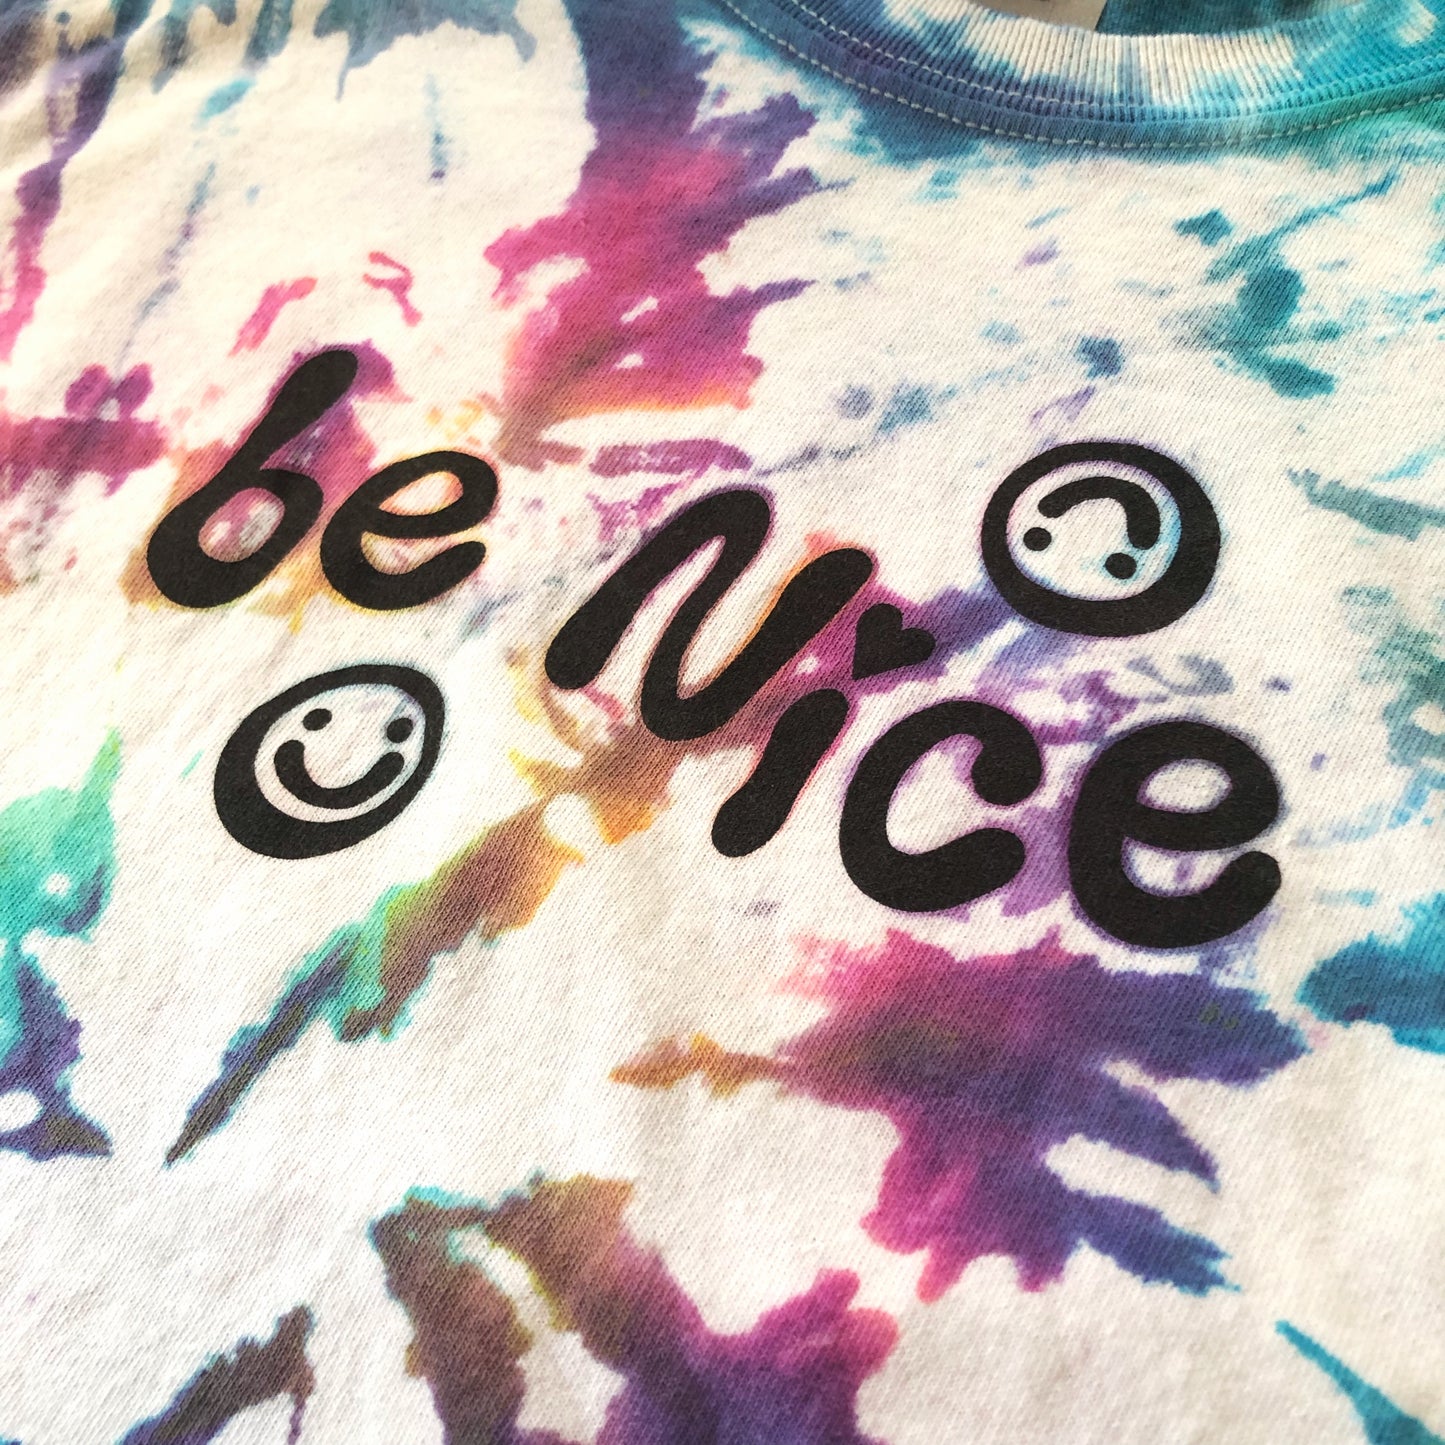 Tie Dye T-shirt - "be nice" Printed Graphic Tee - NEW Colors: Blue, Green, Navy, Pink, and Rainbow